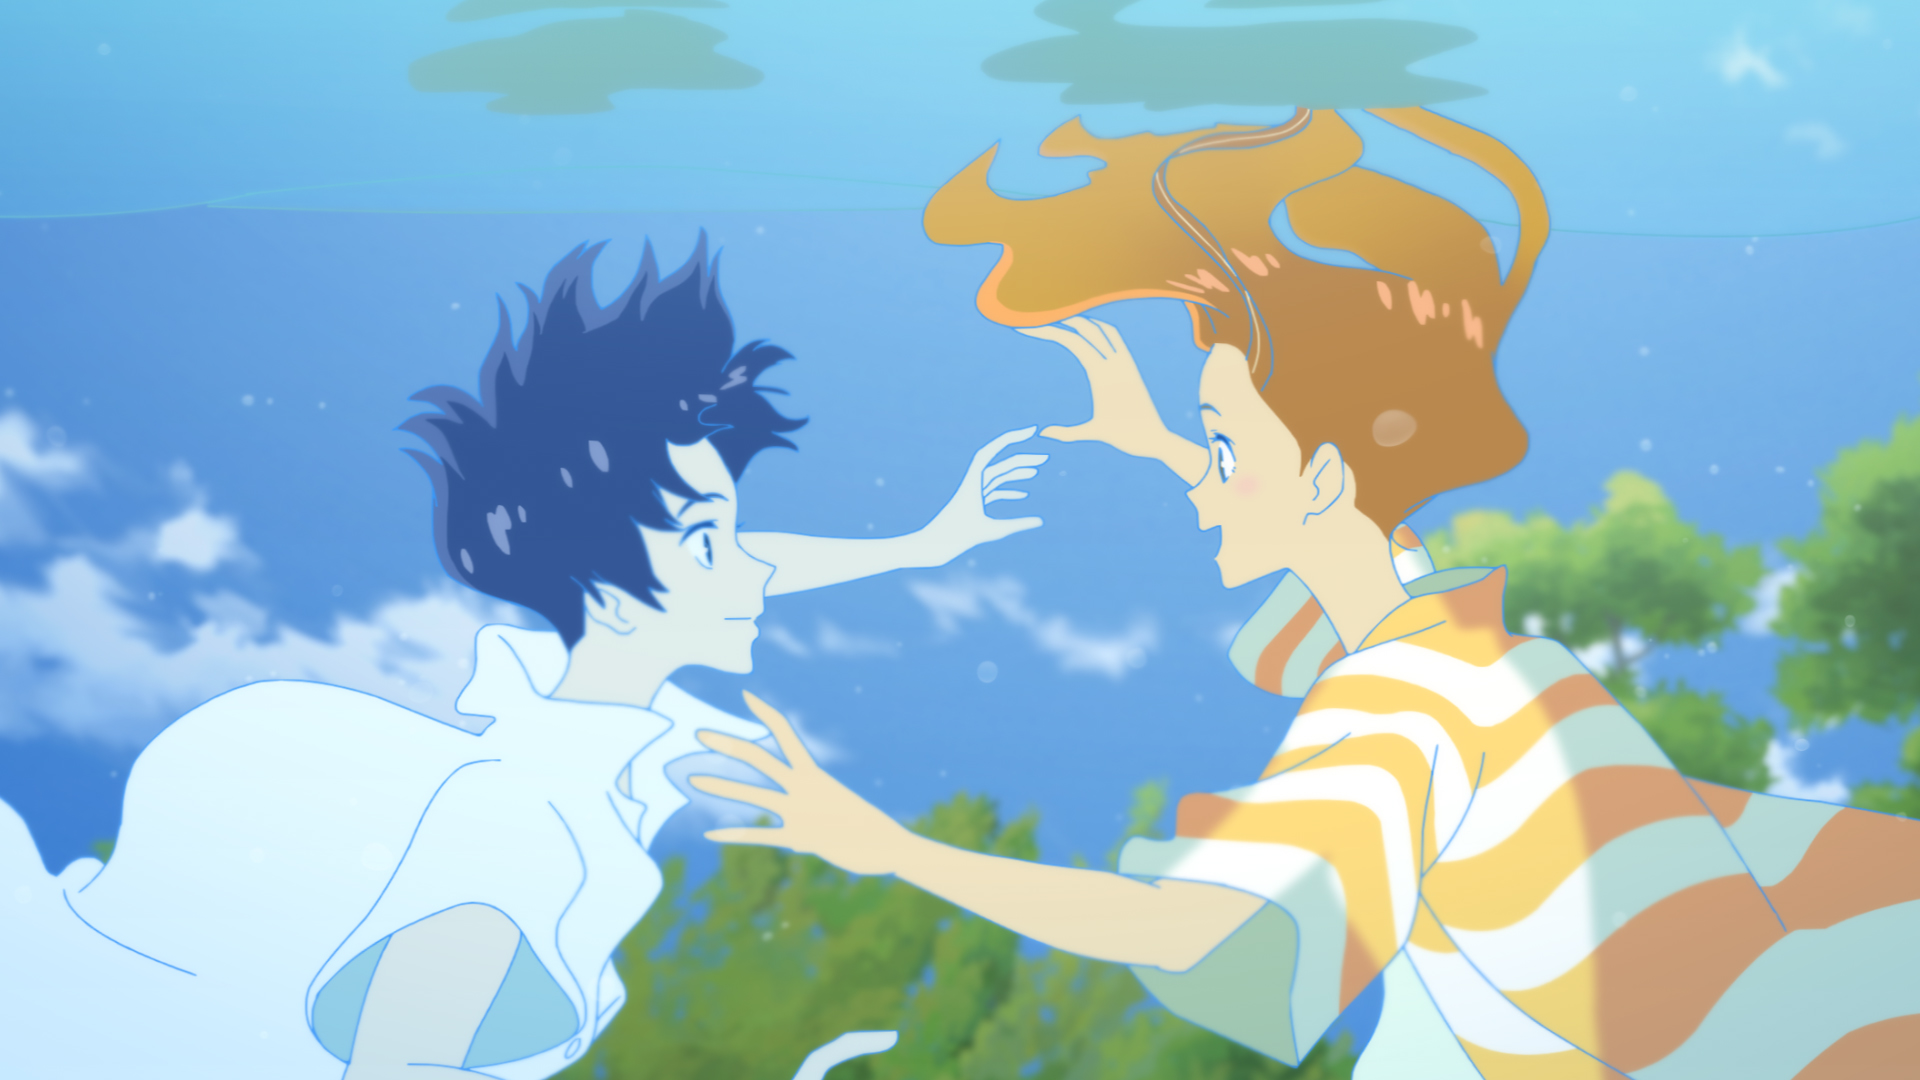 GKIDS has released a trailer for the new anime film Ride Your Wave! 